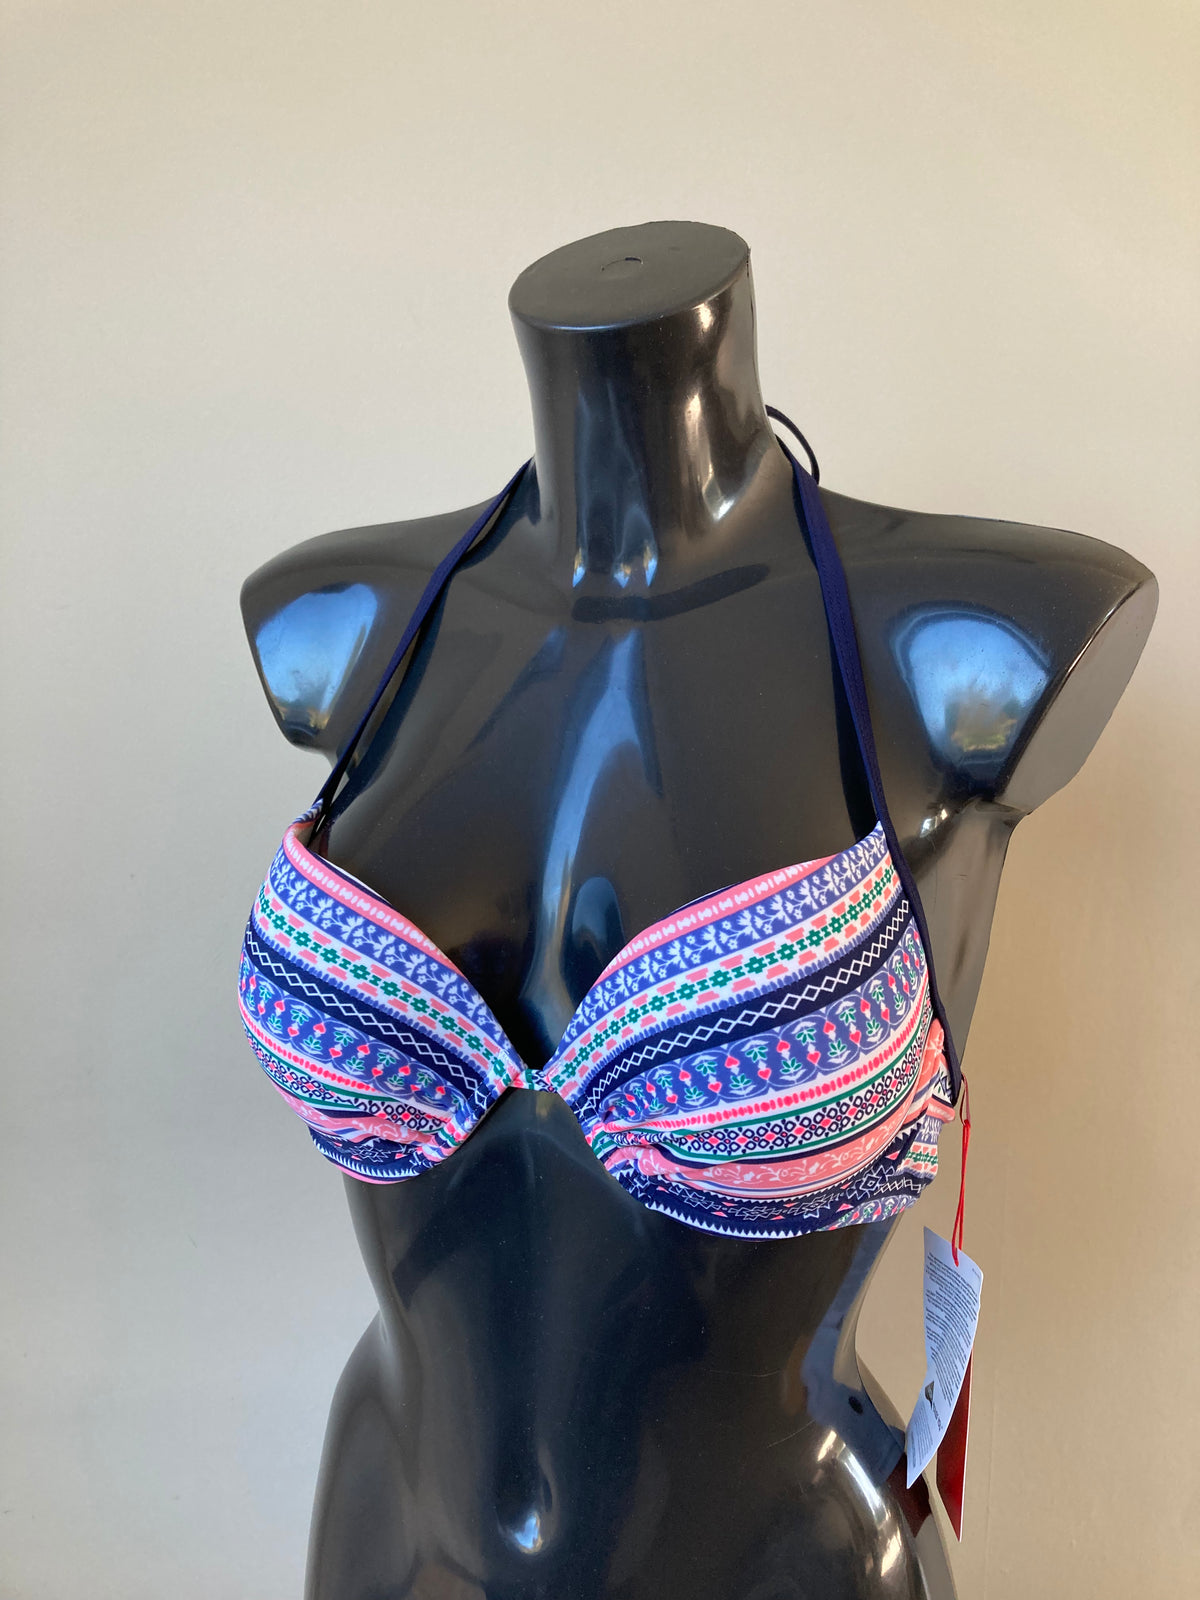 Blue Rose Push Up Bikini Top by S.OLIVER - Size 12B